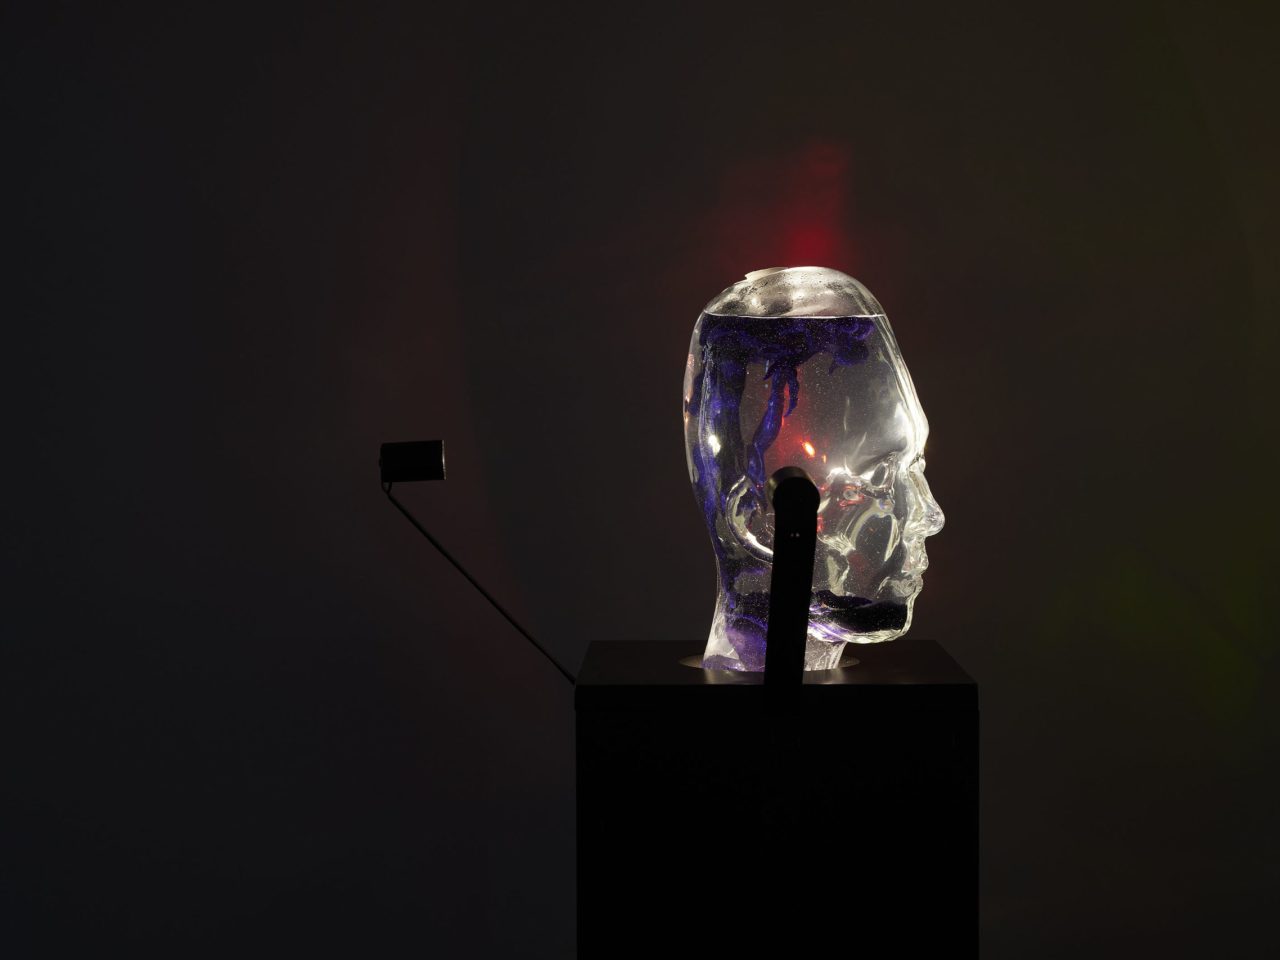 A glass sculpture, in the shape of the artist’s head, are filled with blobs of purple liquid, making the head into a lava lamp.